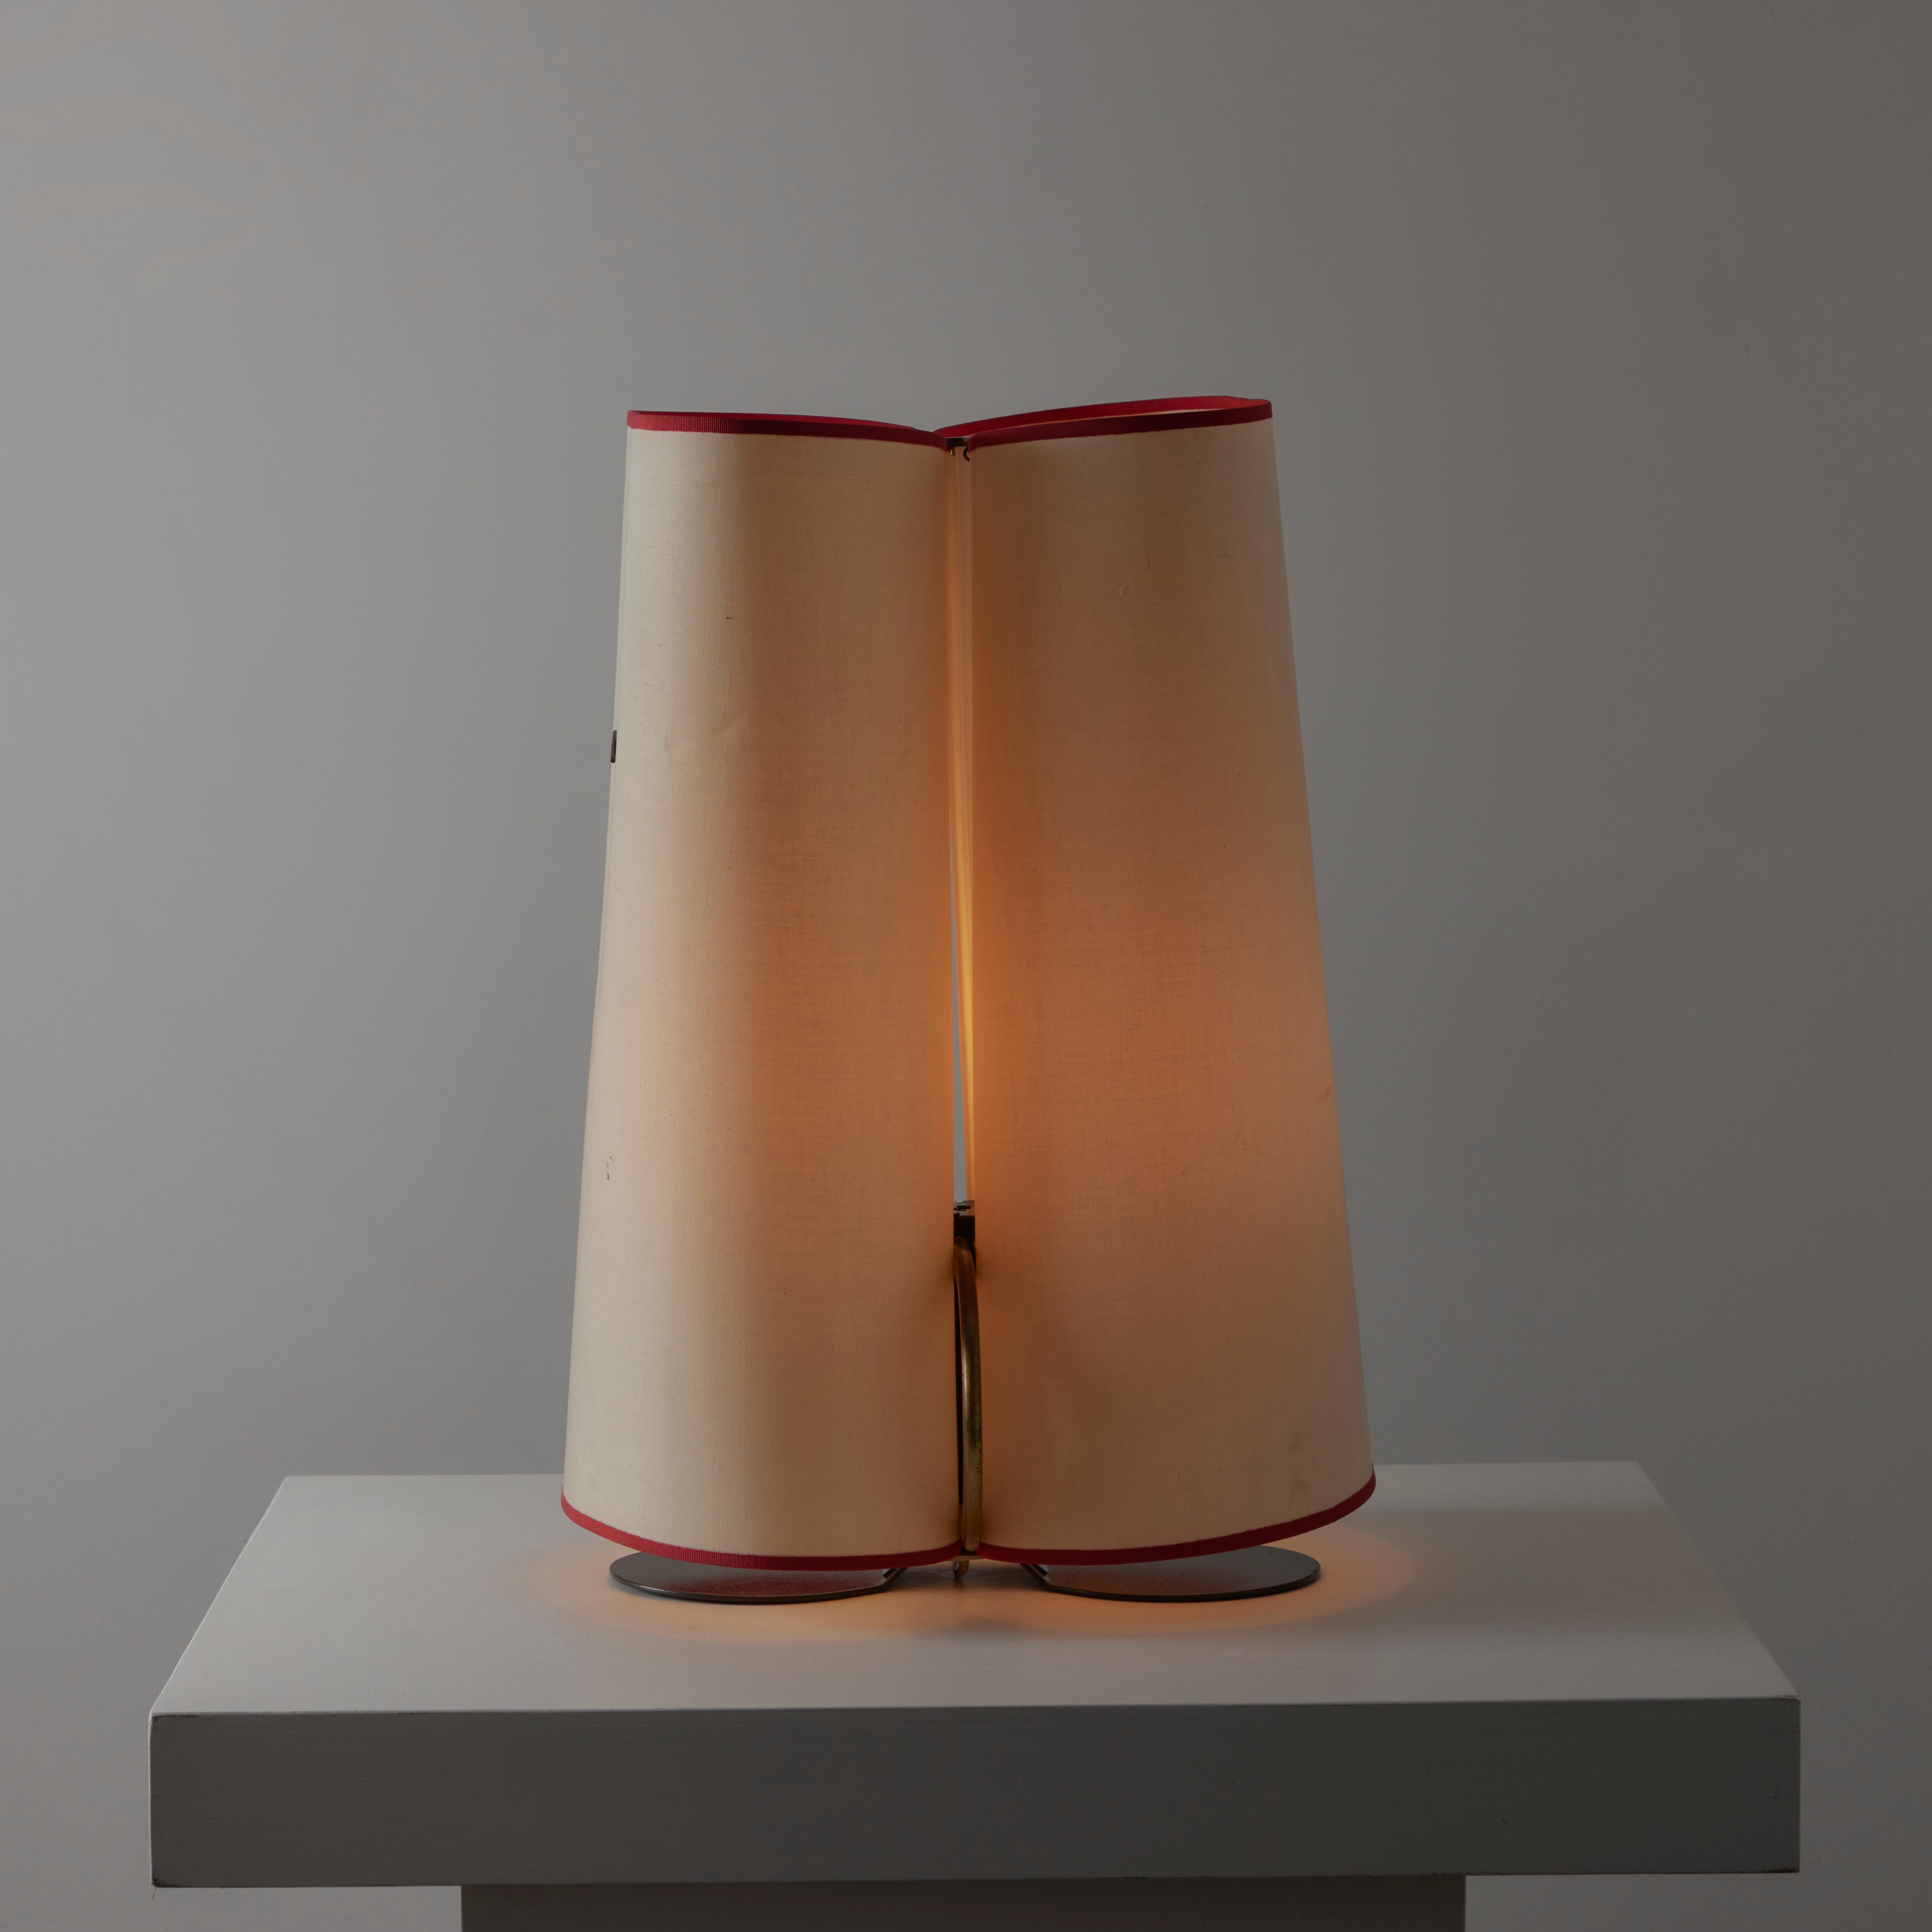 'Abatina' table lamp by Afra and Tobia Scarpa for Flos. Designed and manufactured in Italy, circa the 1980s. Beautifully crafted double-panel wrapped contraption by the duo designers. Each panel consists of a thick paper which is trimmed in a red